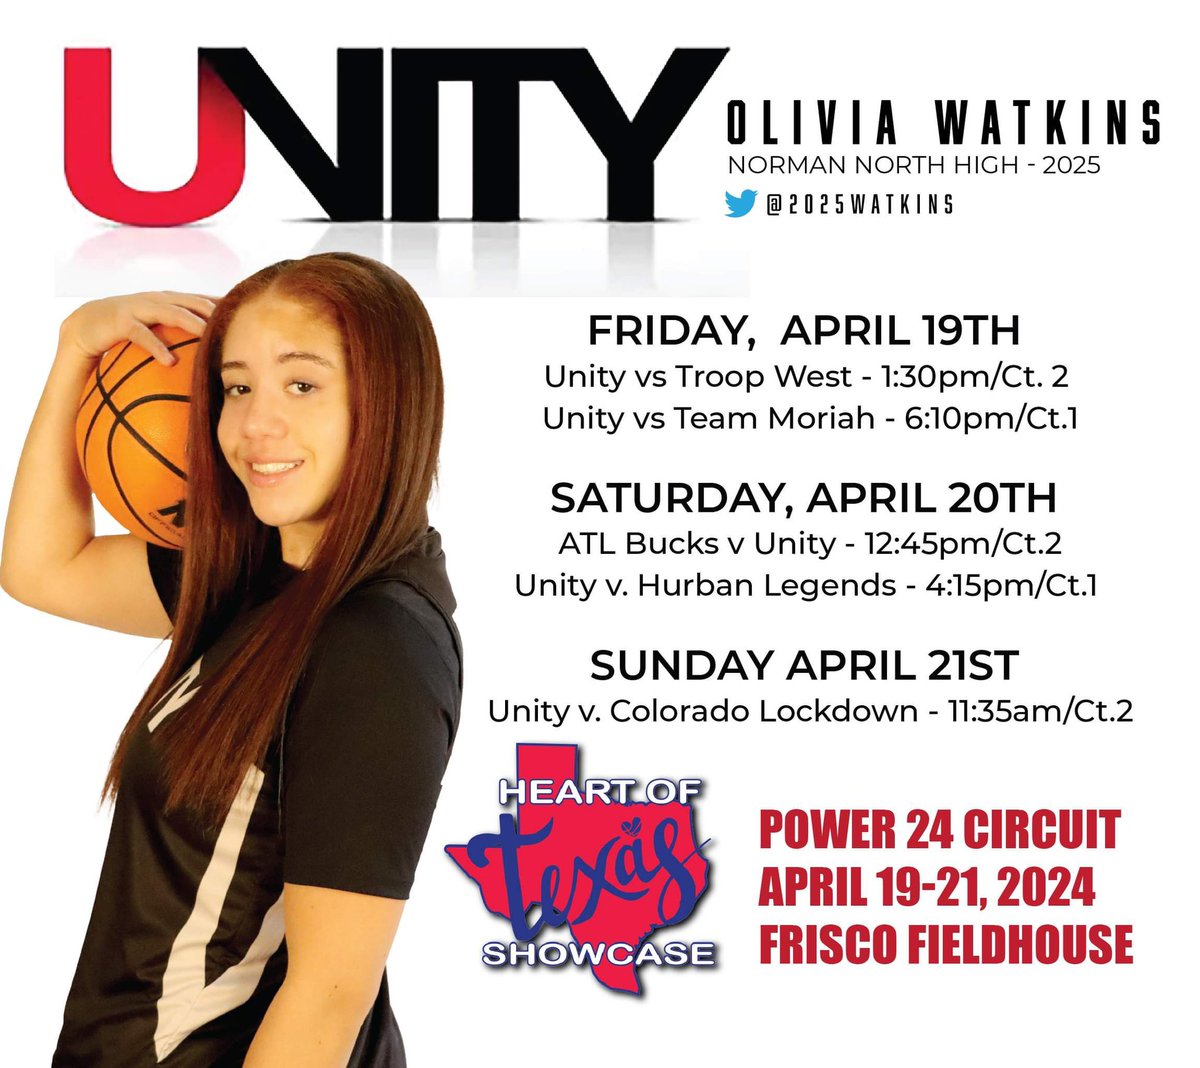 Coaches, catch my team and I this weekend at Frisco Fieldhouse! @unitybasketbal1 @Ajhawkinsbasket